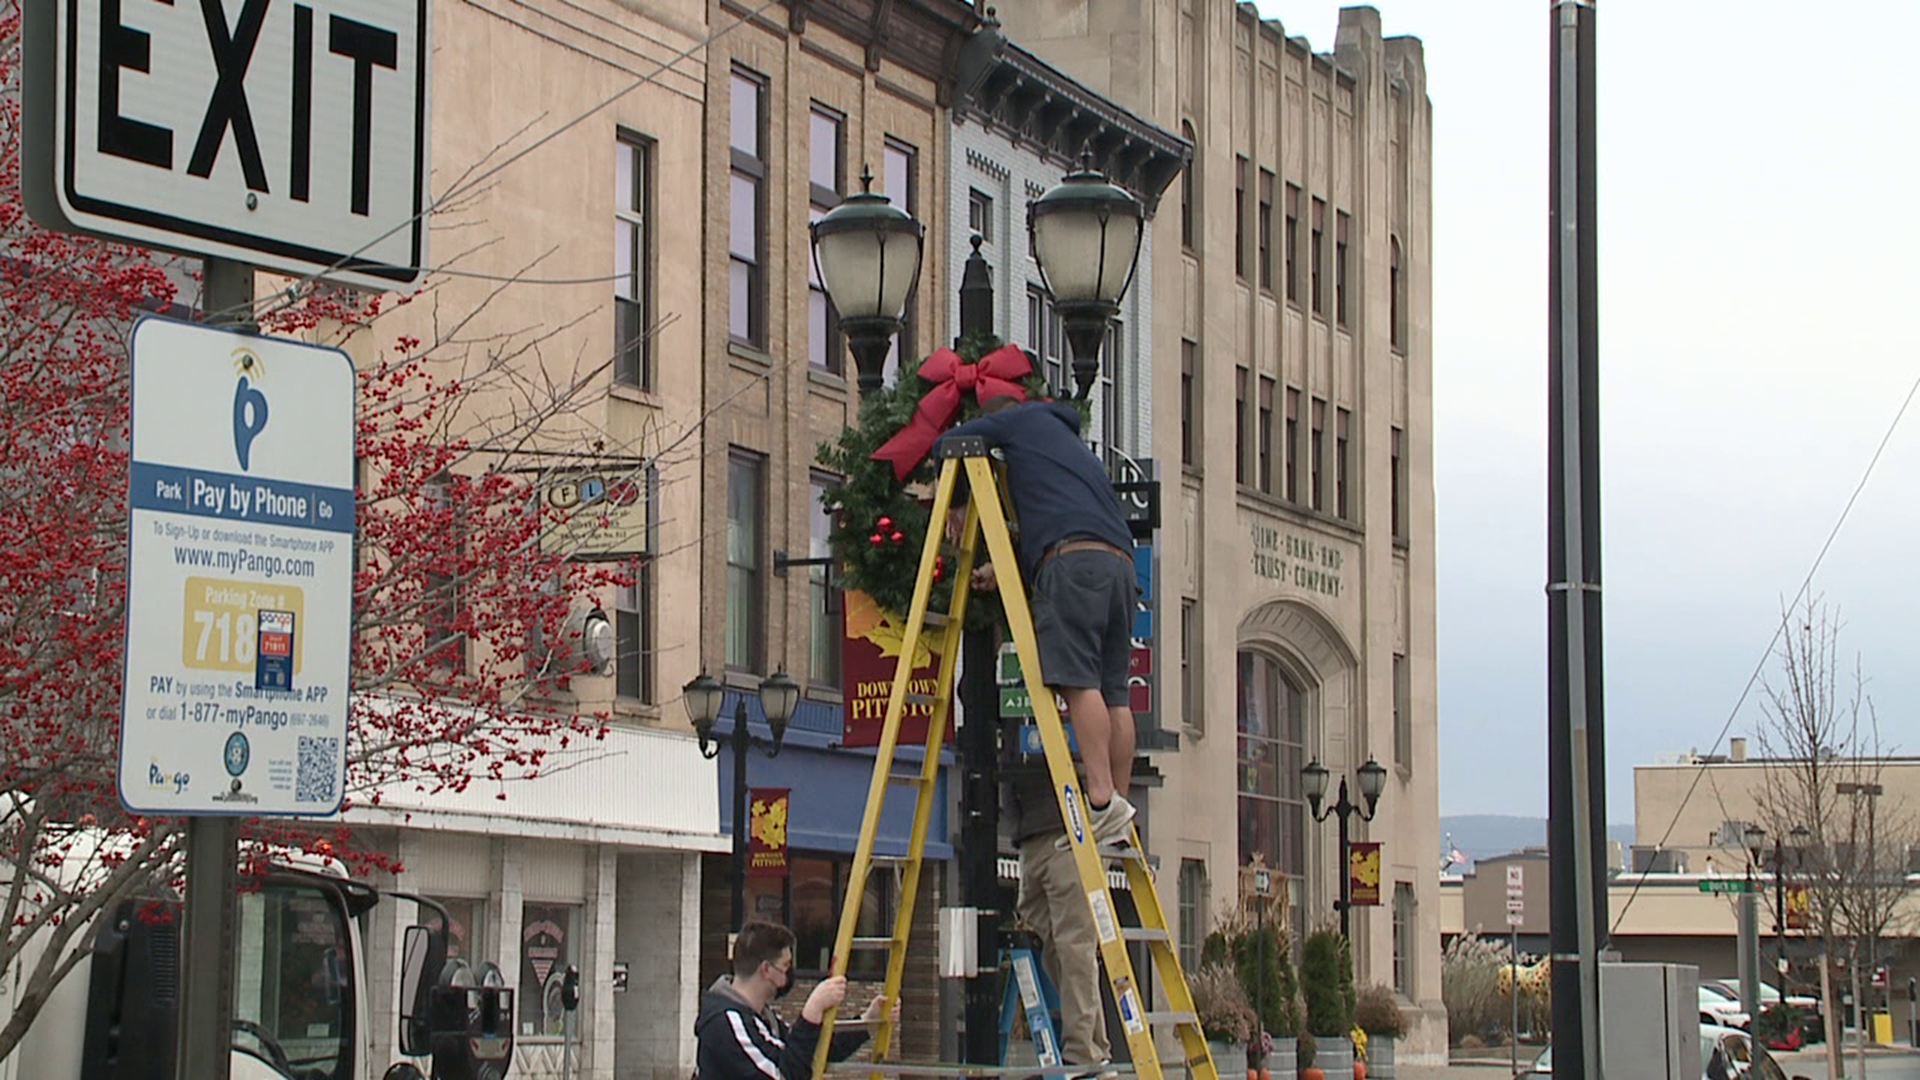 Newswatch 16 found crews decorating for the holidays at the former Globe store along Wyoming Avenue.